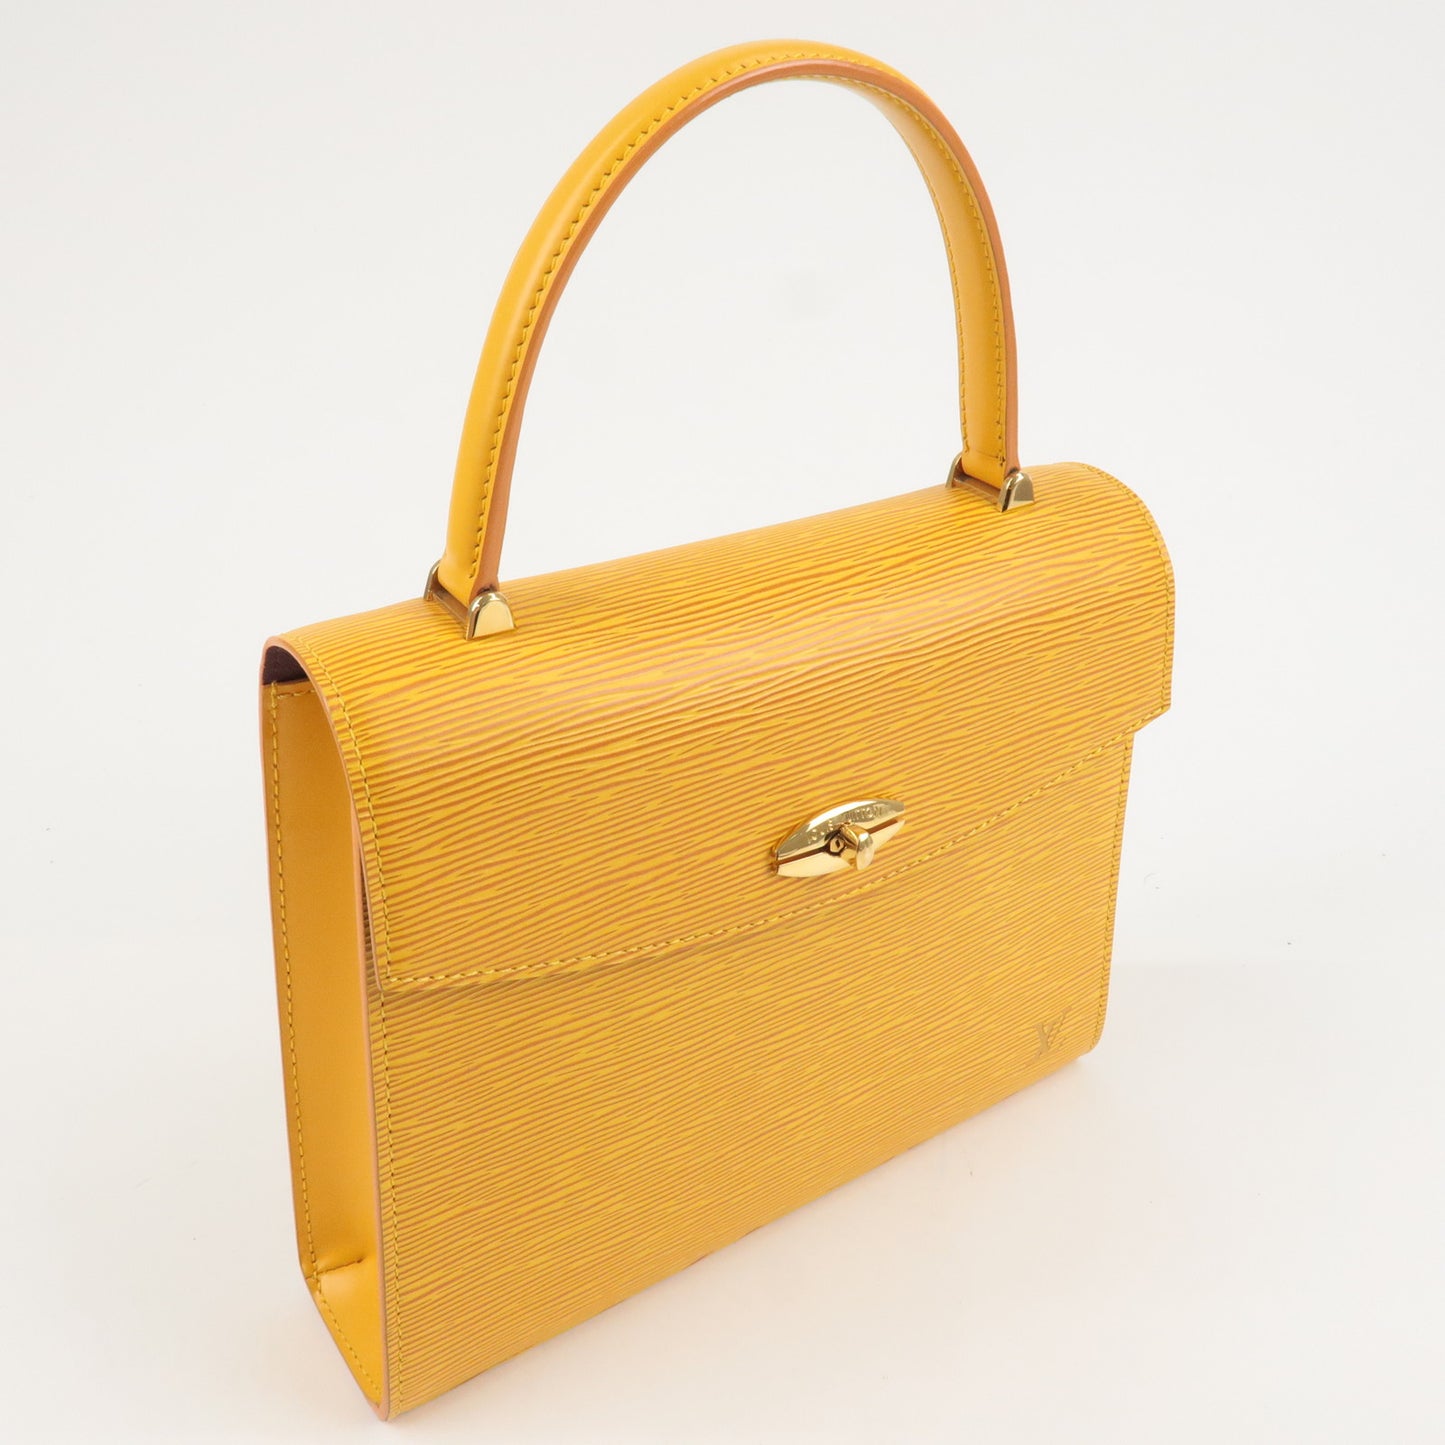 Buy Free Shipping Authentic Pre-owned Louis Vuitton Epi Tassili Yellow  Malesherbes Handbag Purse M52379 220136 from Japan - Buy authentic Plus  exclusive items from Japan